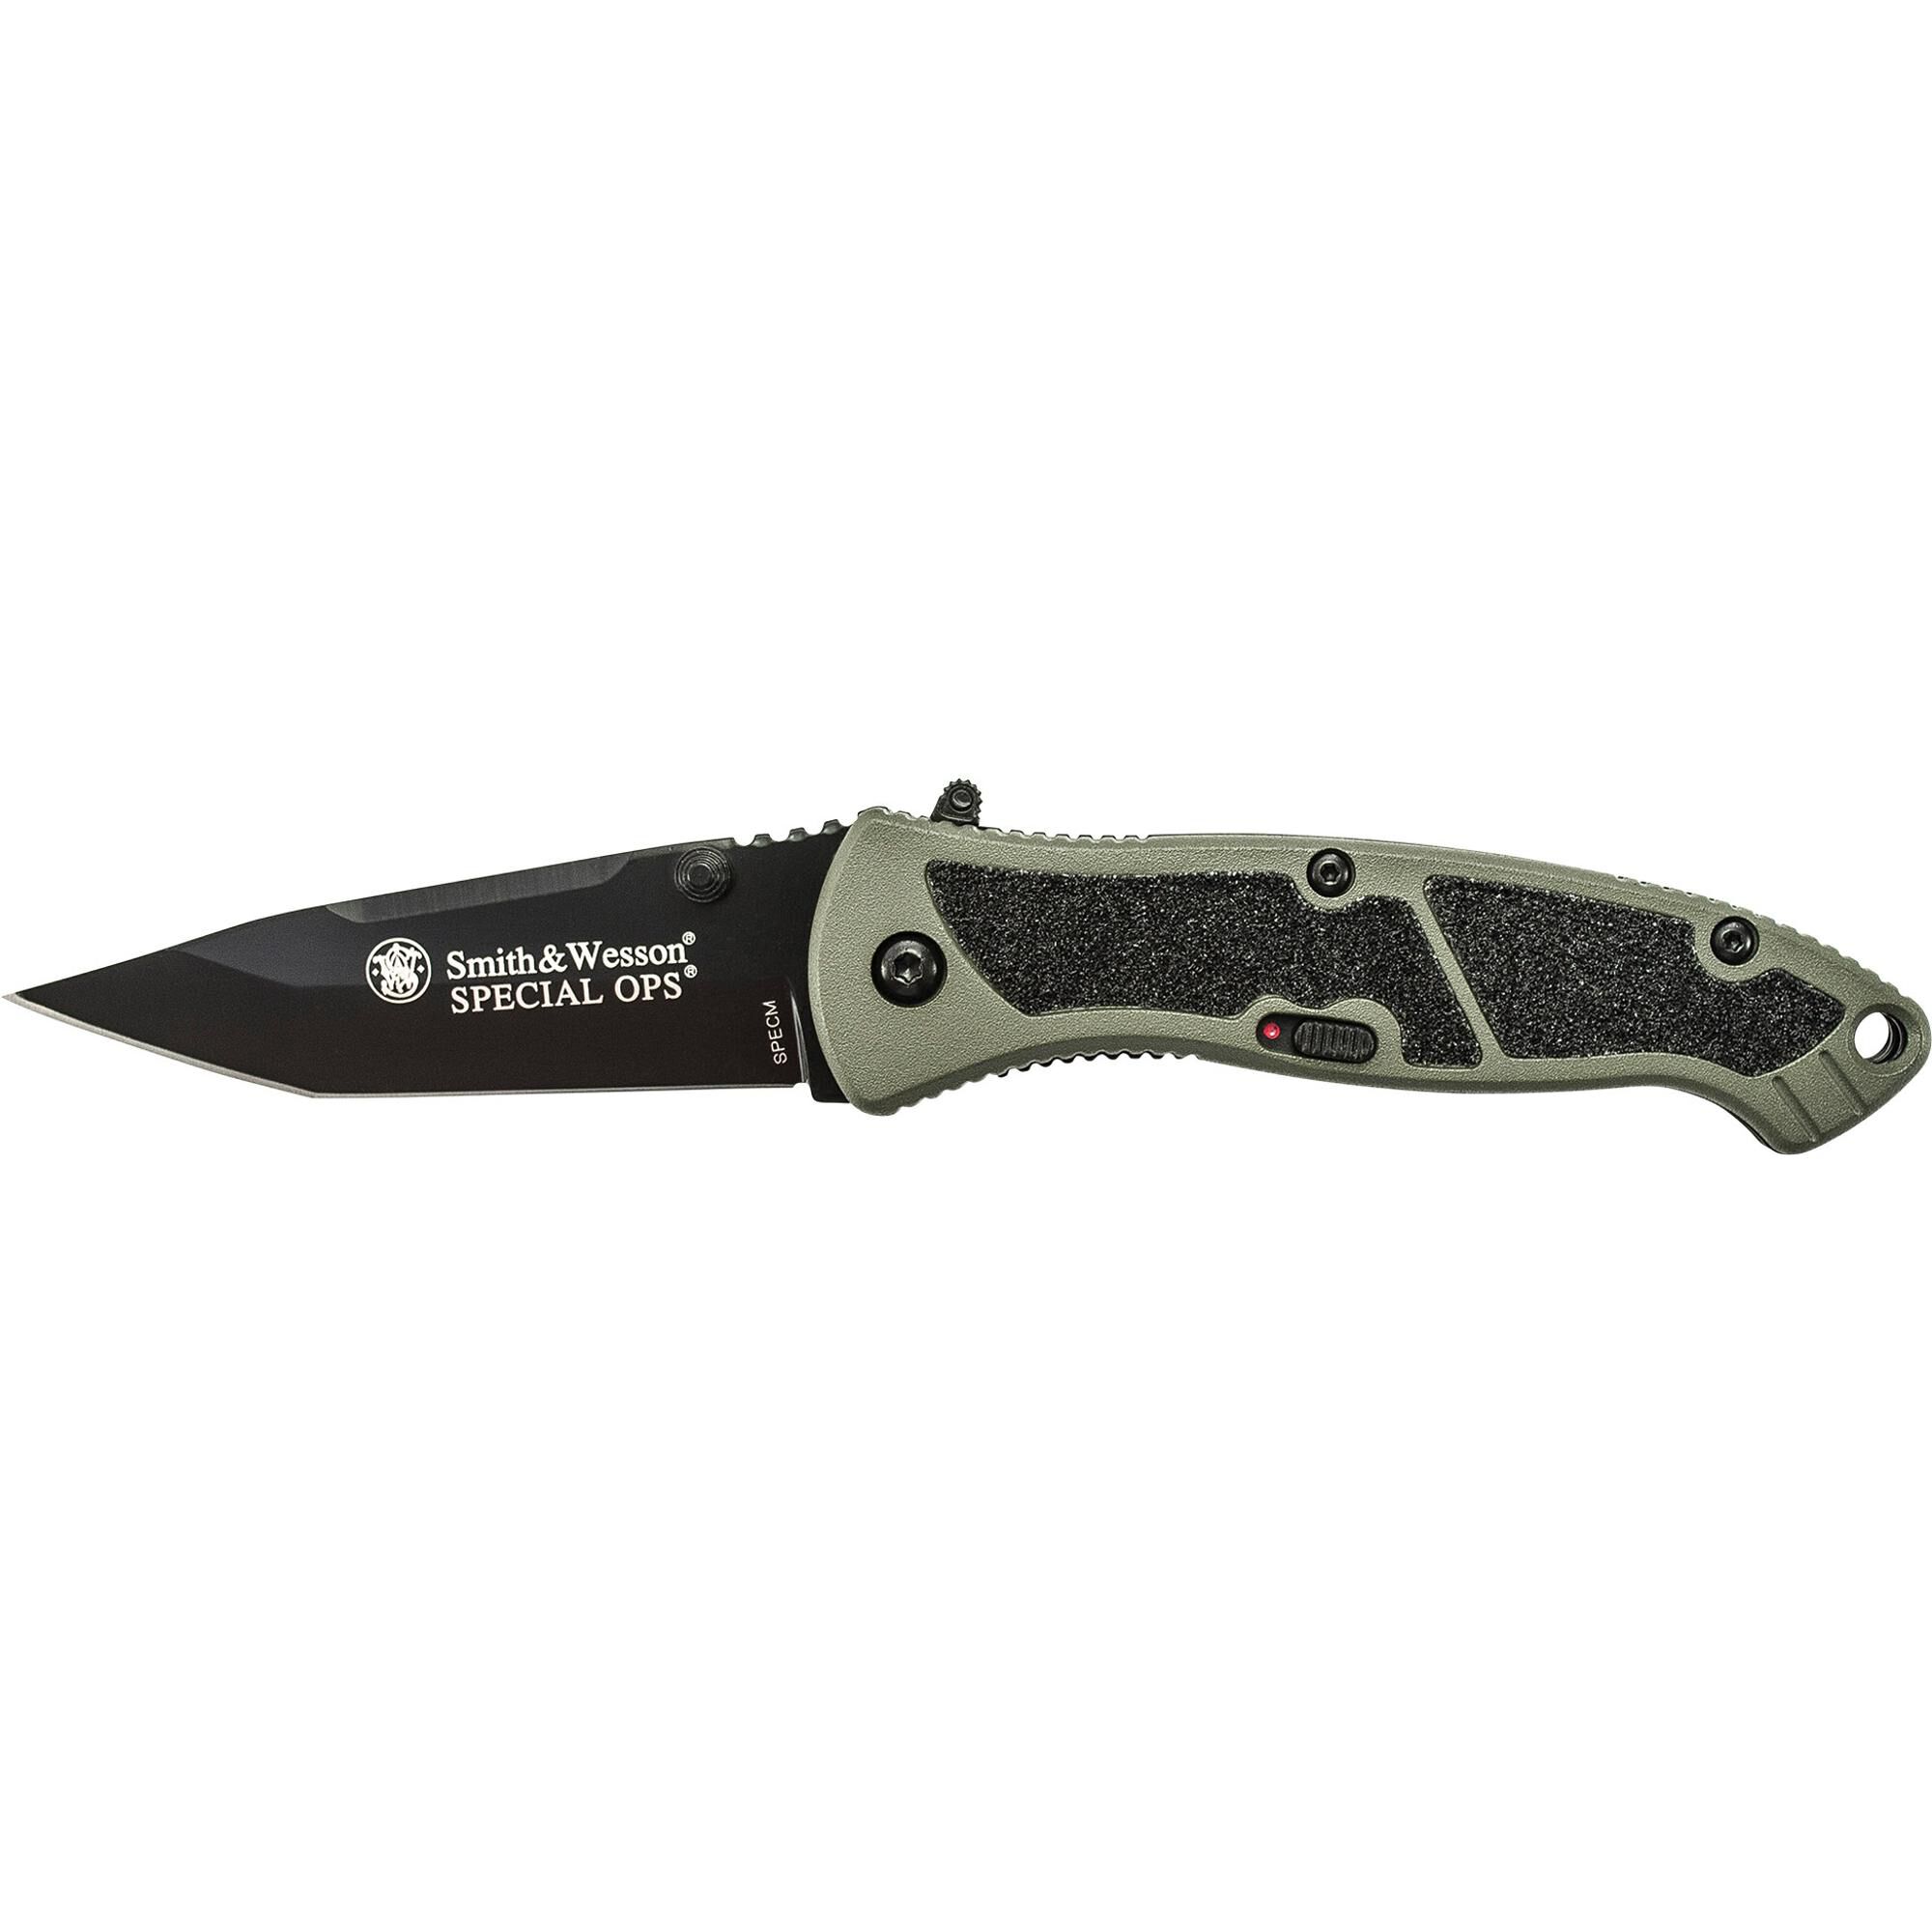 Smith and Wesson SPECM Medium Special Ops T6061 Aircraft Aluminum Green Handle for sale online 